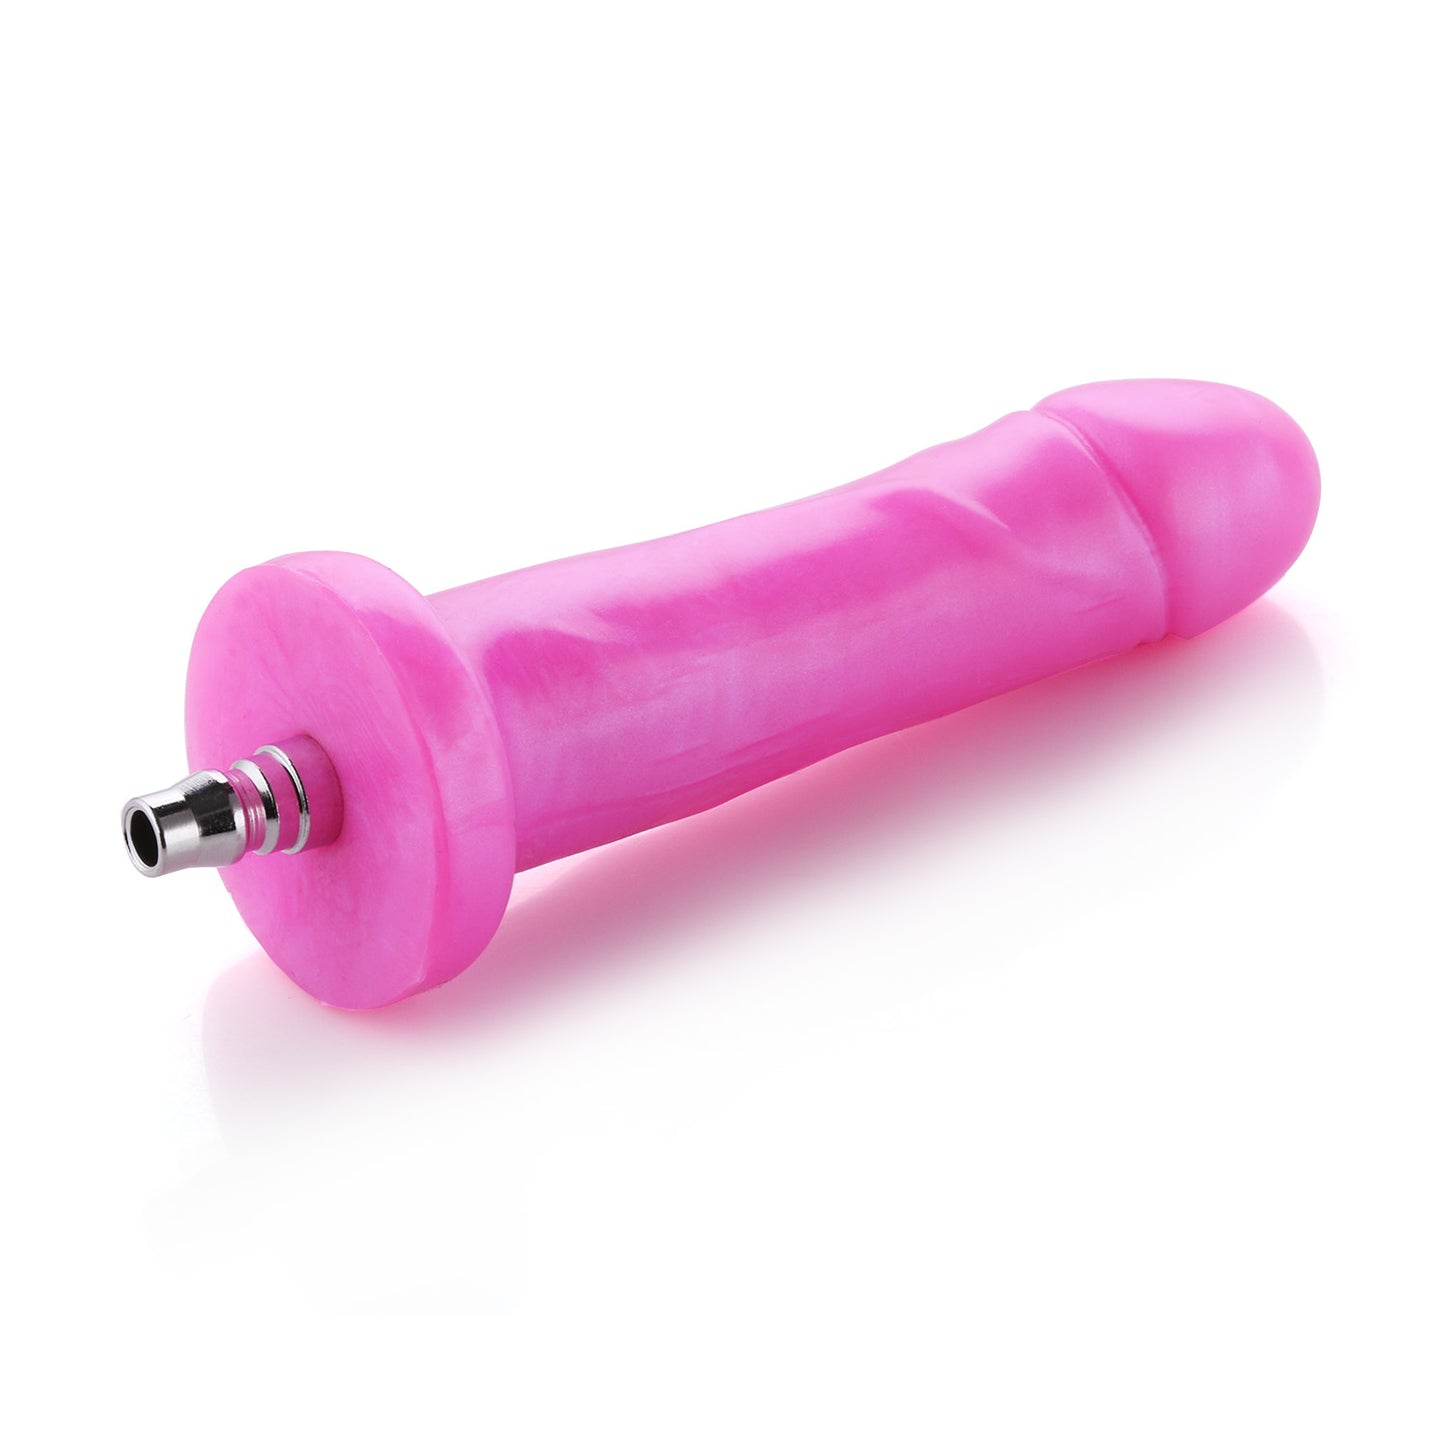 Hismith Premium Anal Medical Silicone Dildo Pink with Quick Air Connector